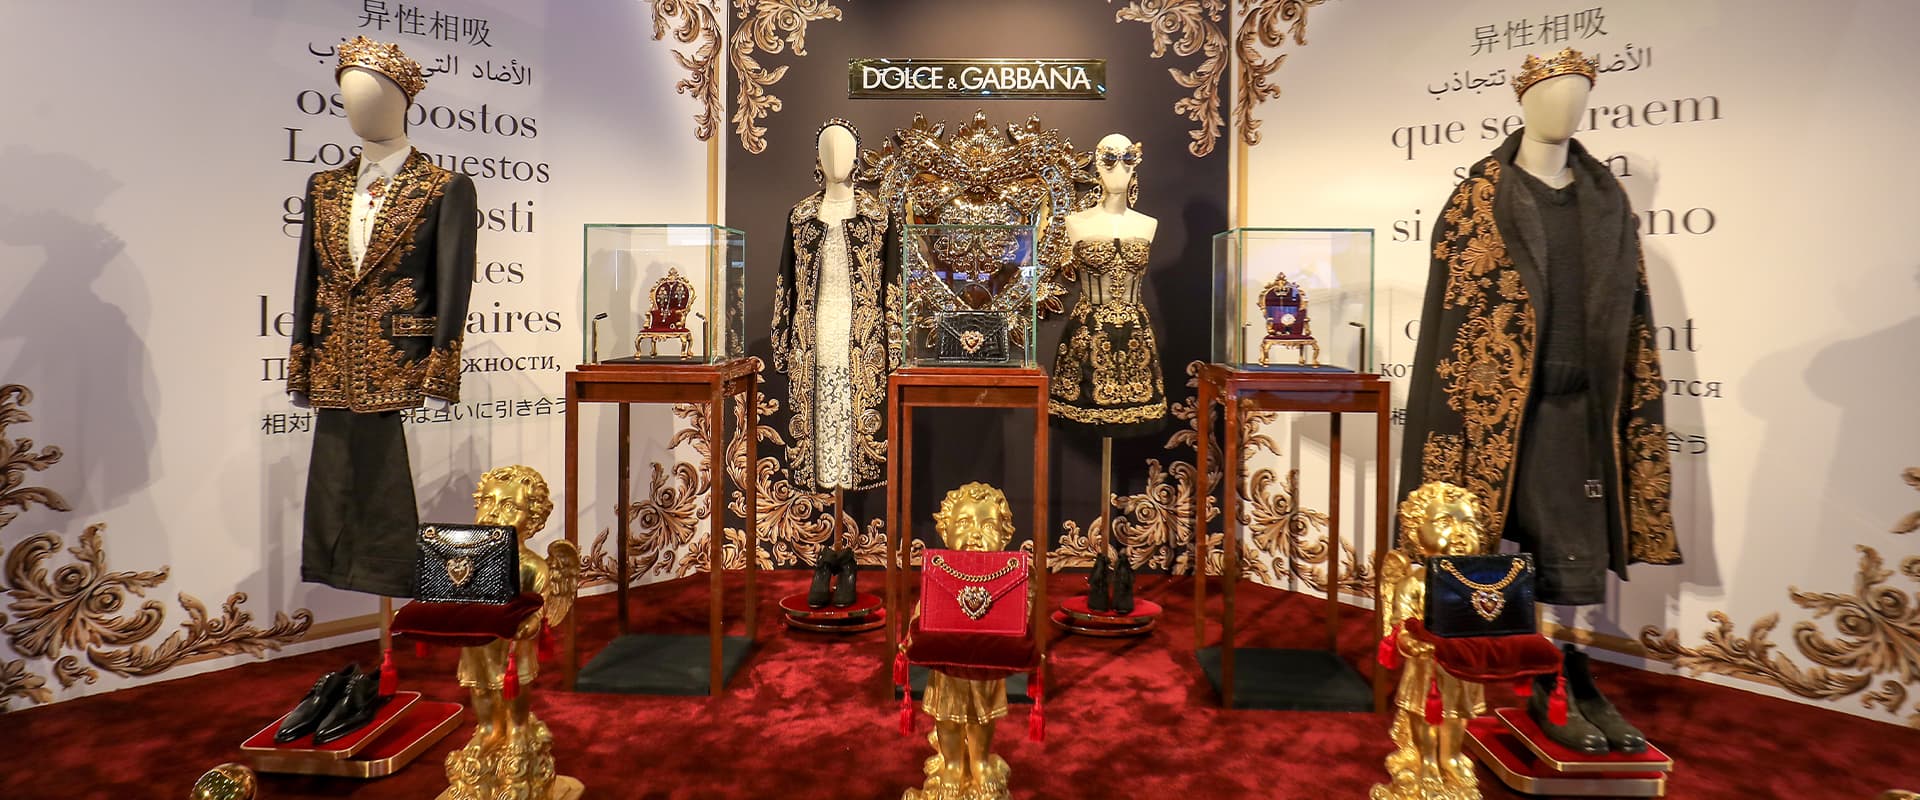 dolce-and-gabbana-expo-cina-ciie-2019-top-banner-devotion